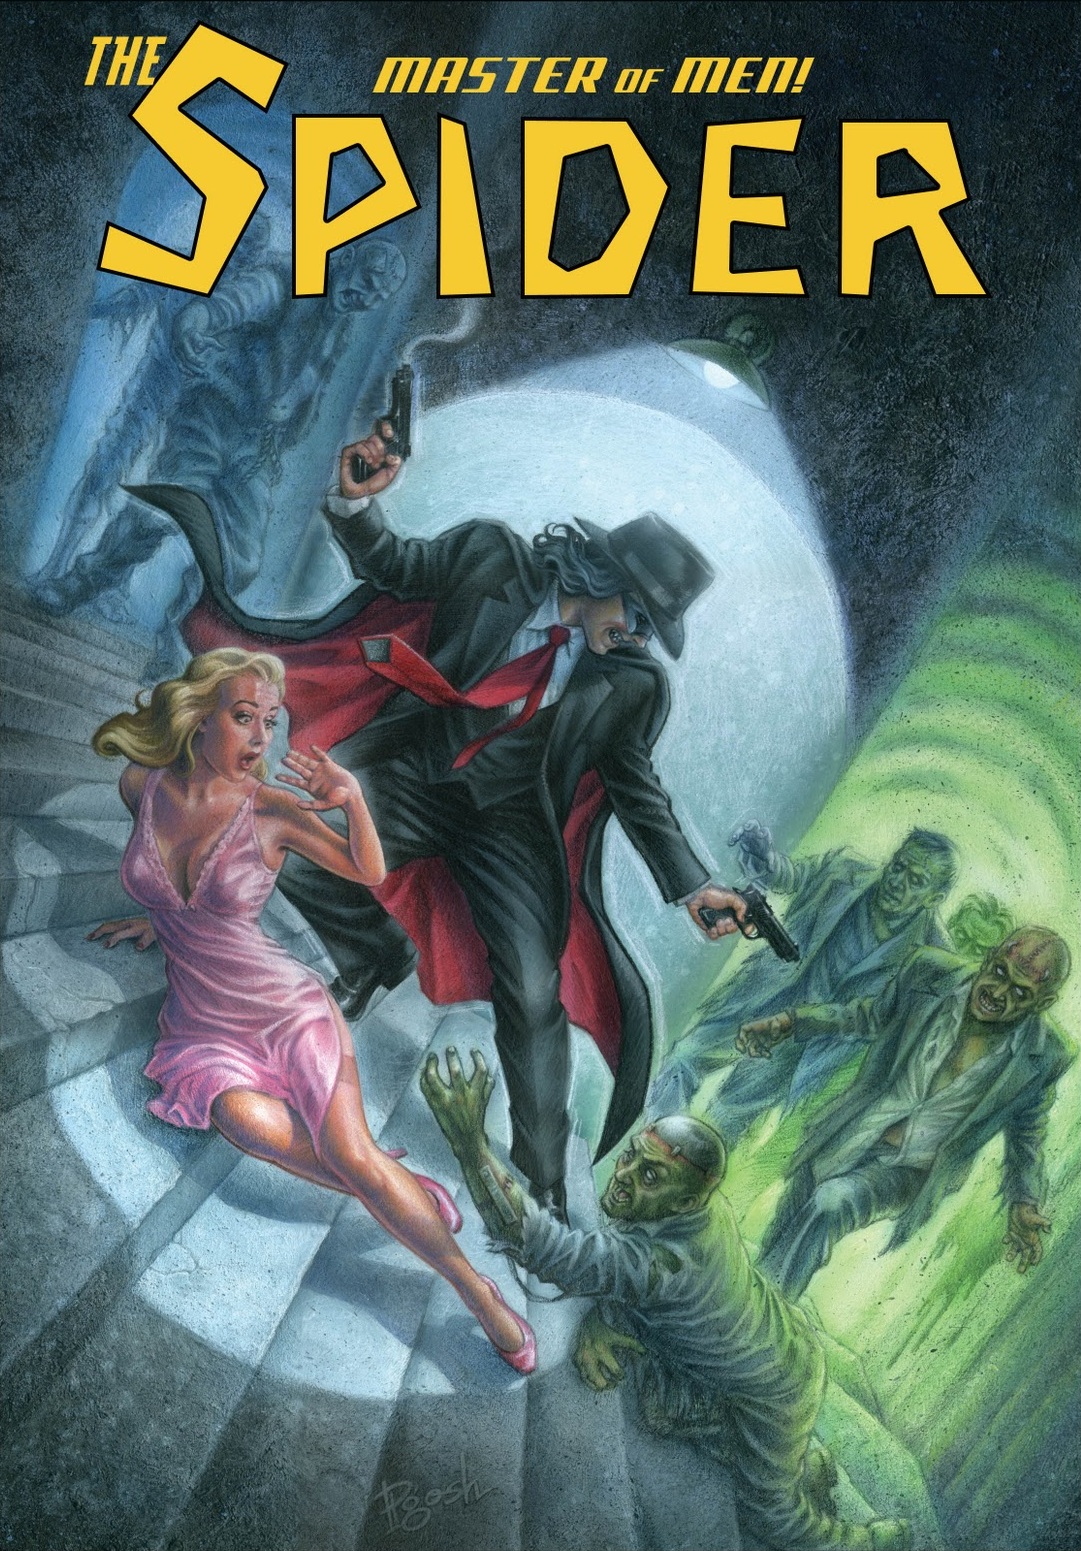 THE SPIDER #1